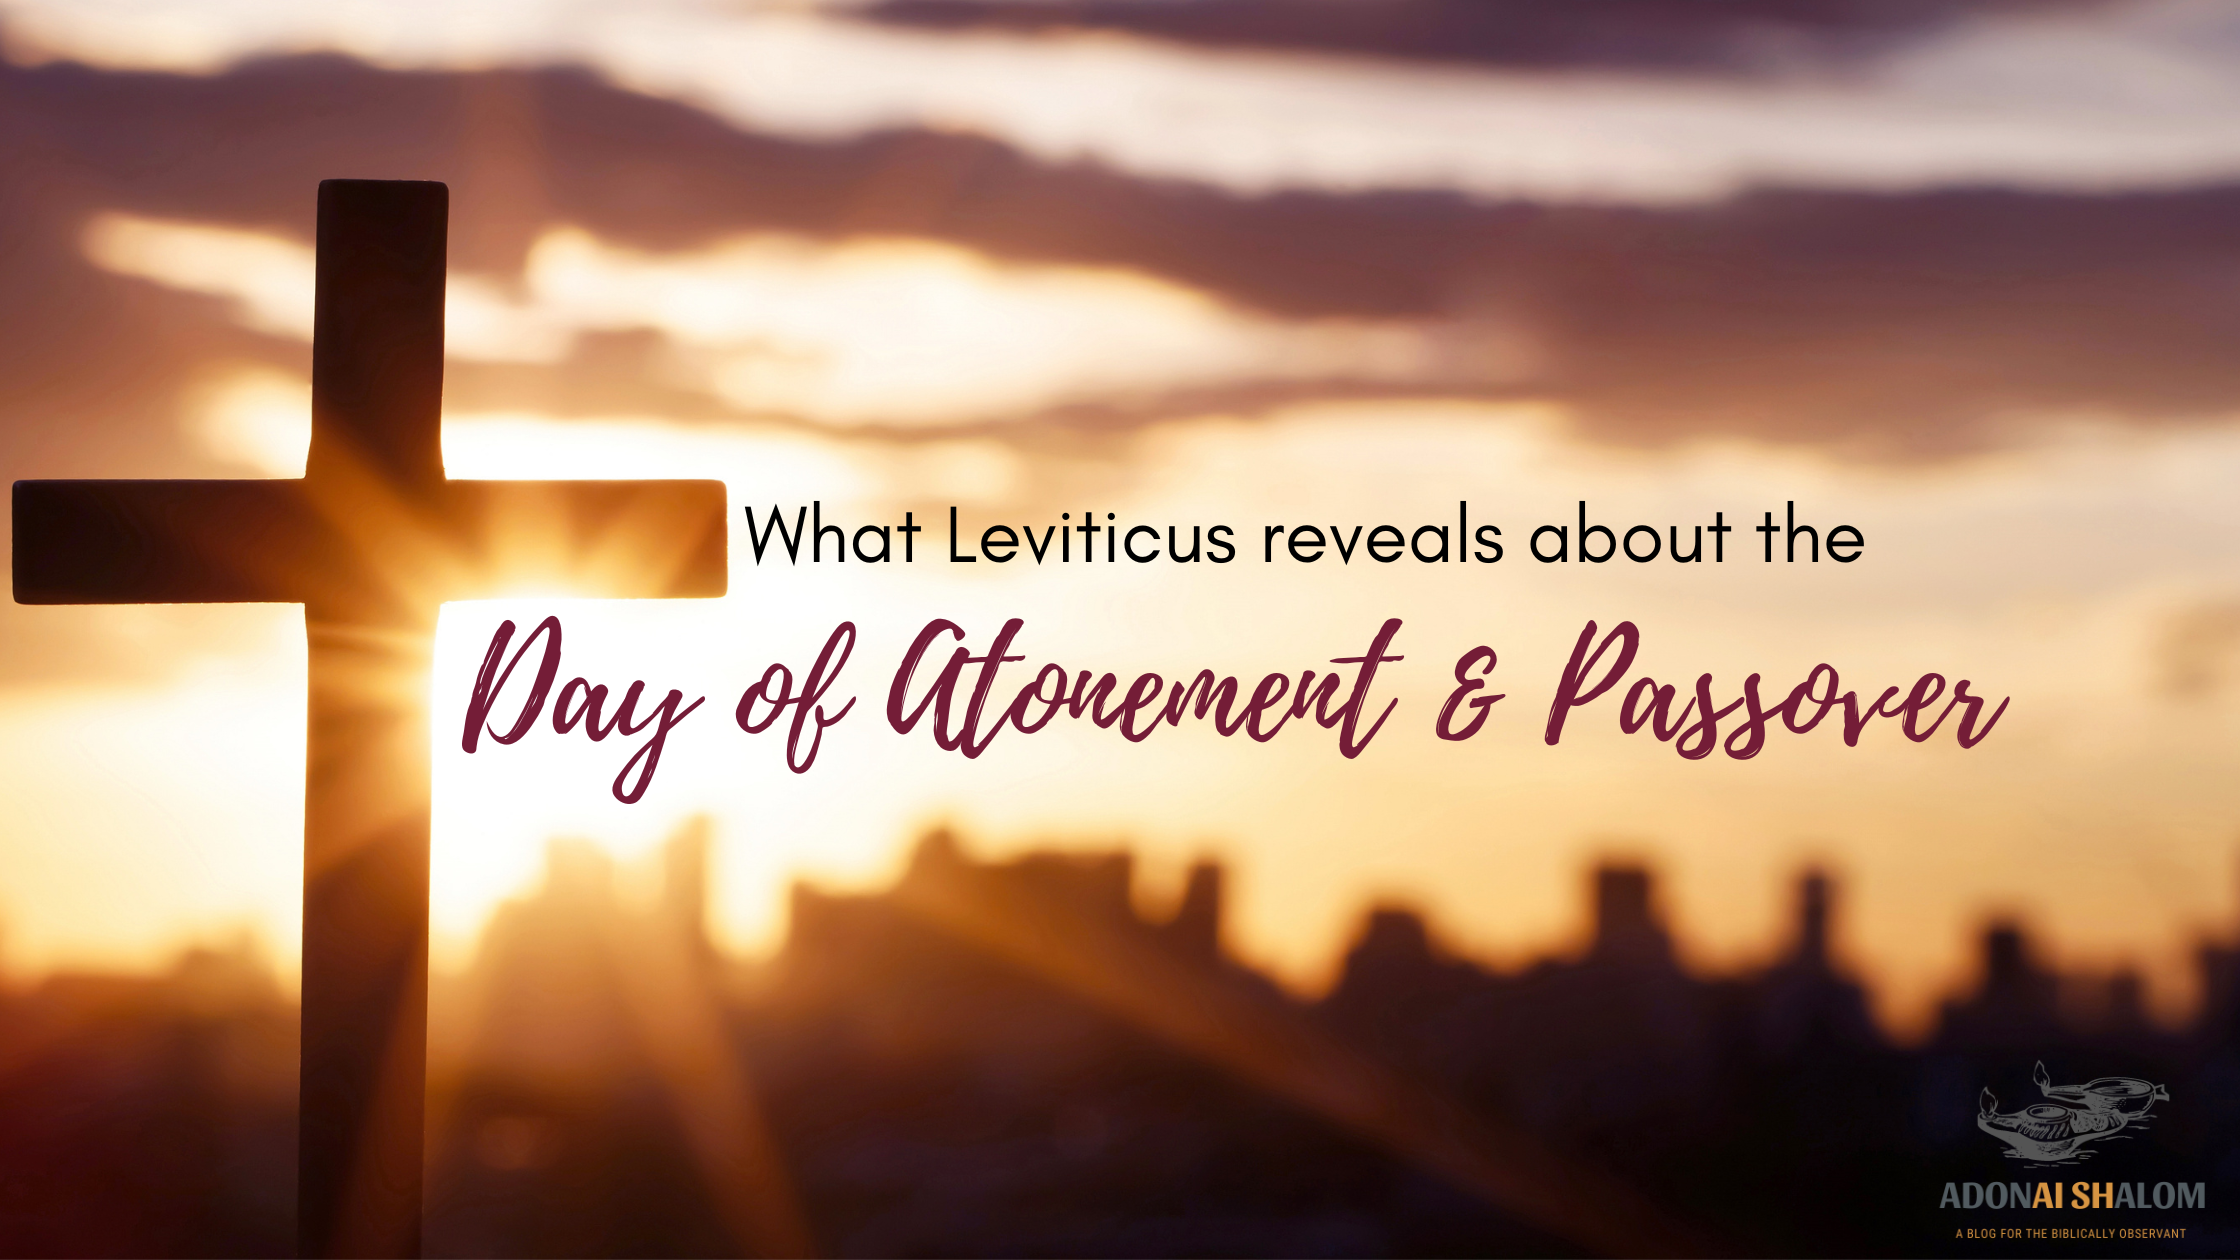 What Leviticus reveals about the Day of Atonement and Passover